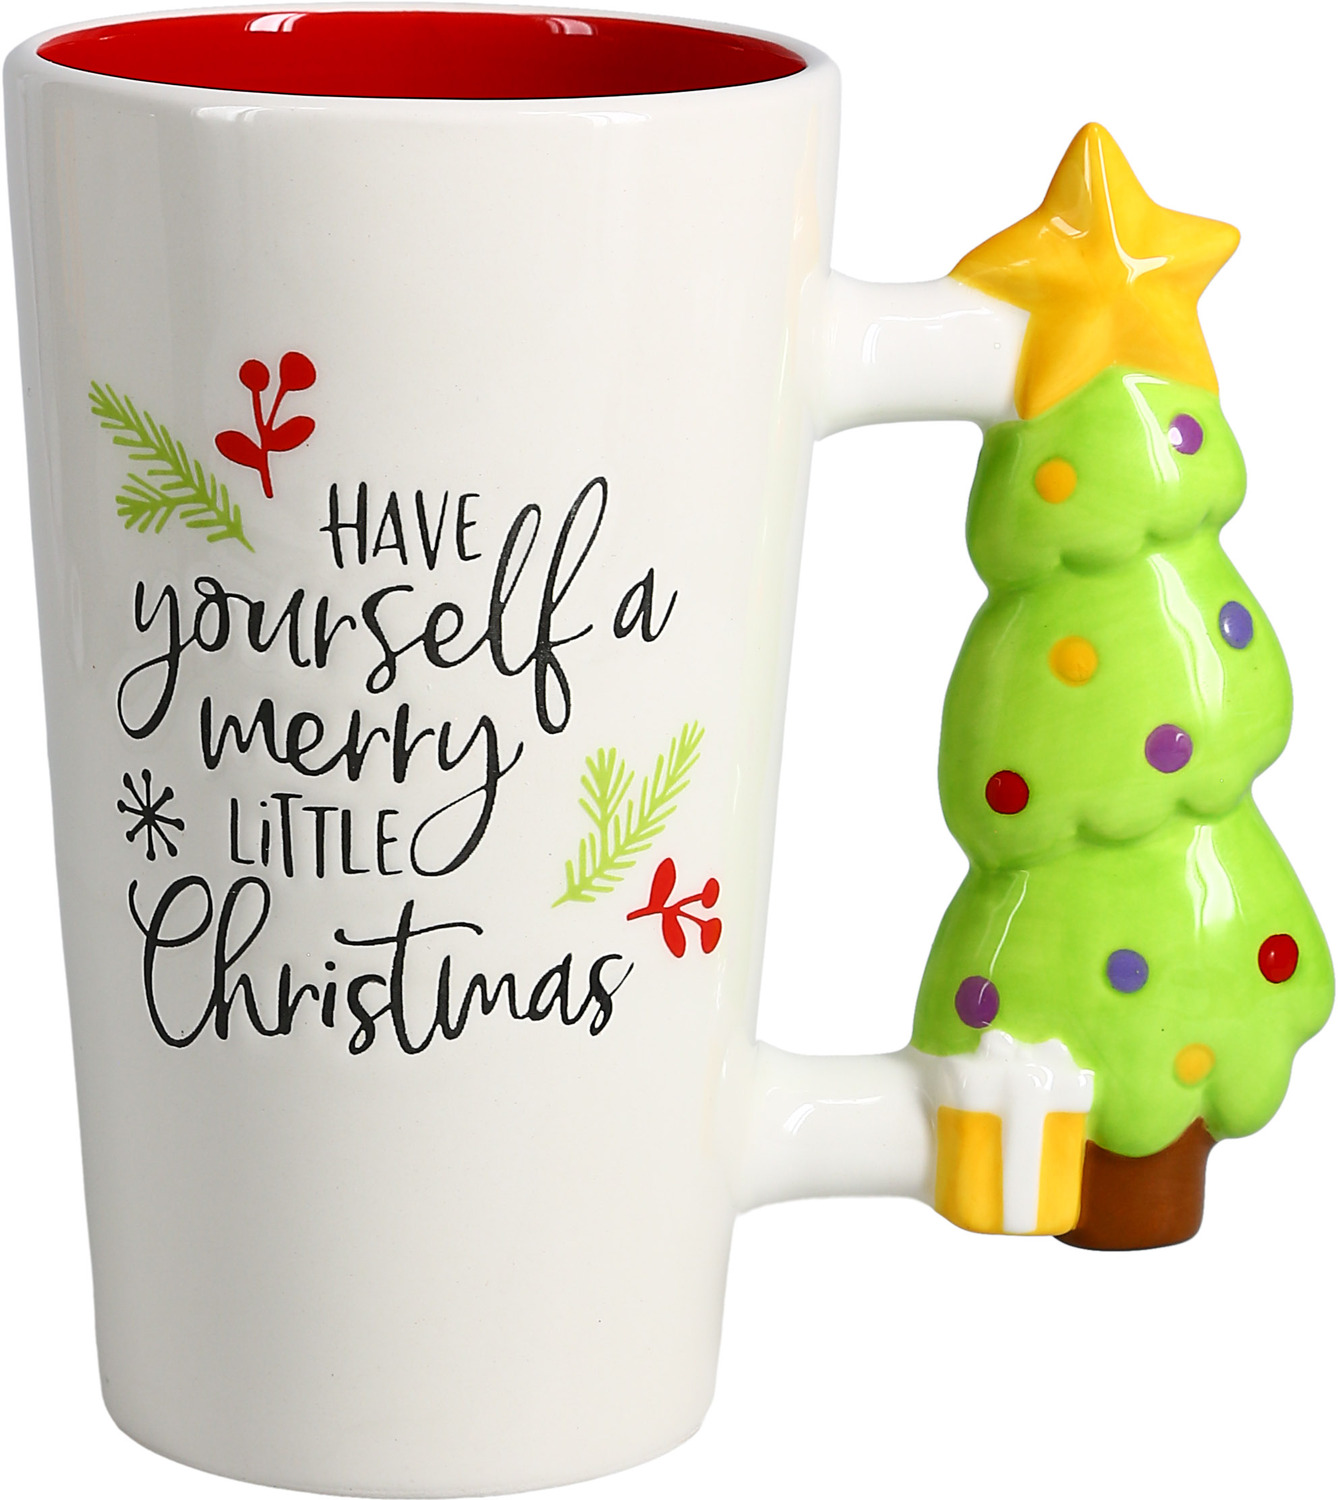 Merry Little Christmas by Holiday Hoopla - Merry Little Christmas - 17.5 oz Latte Cup